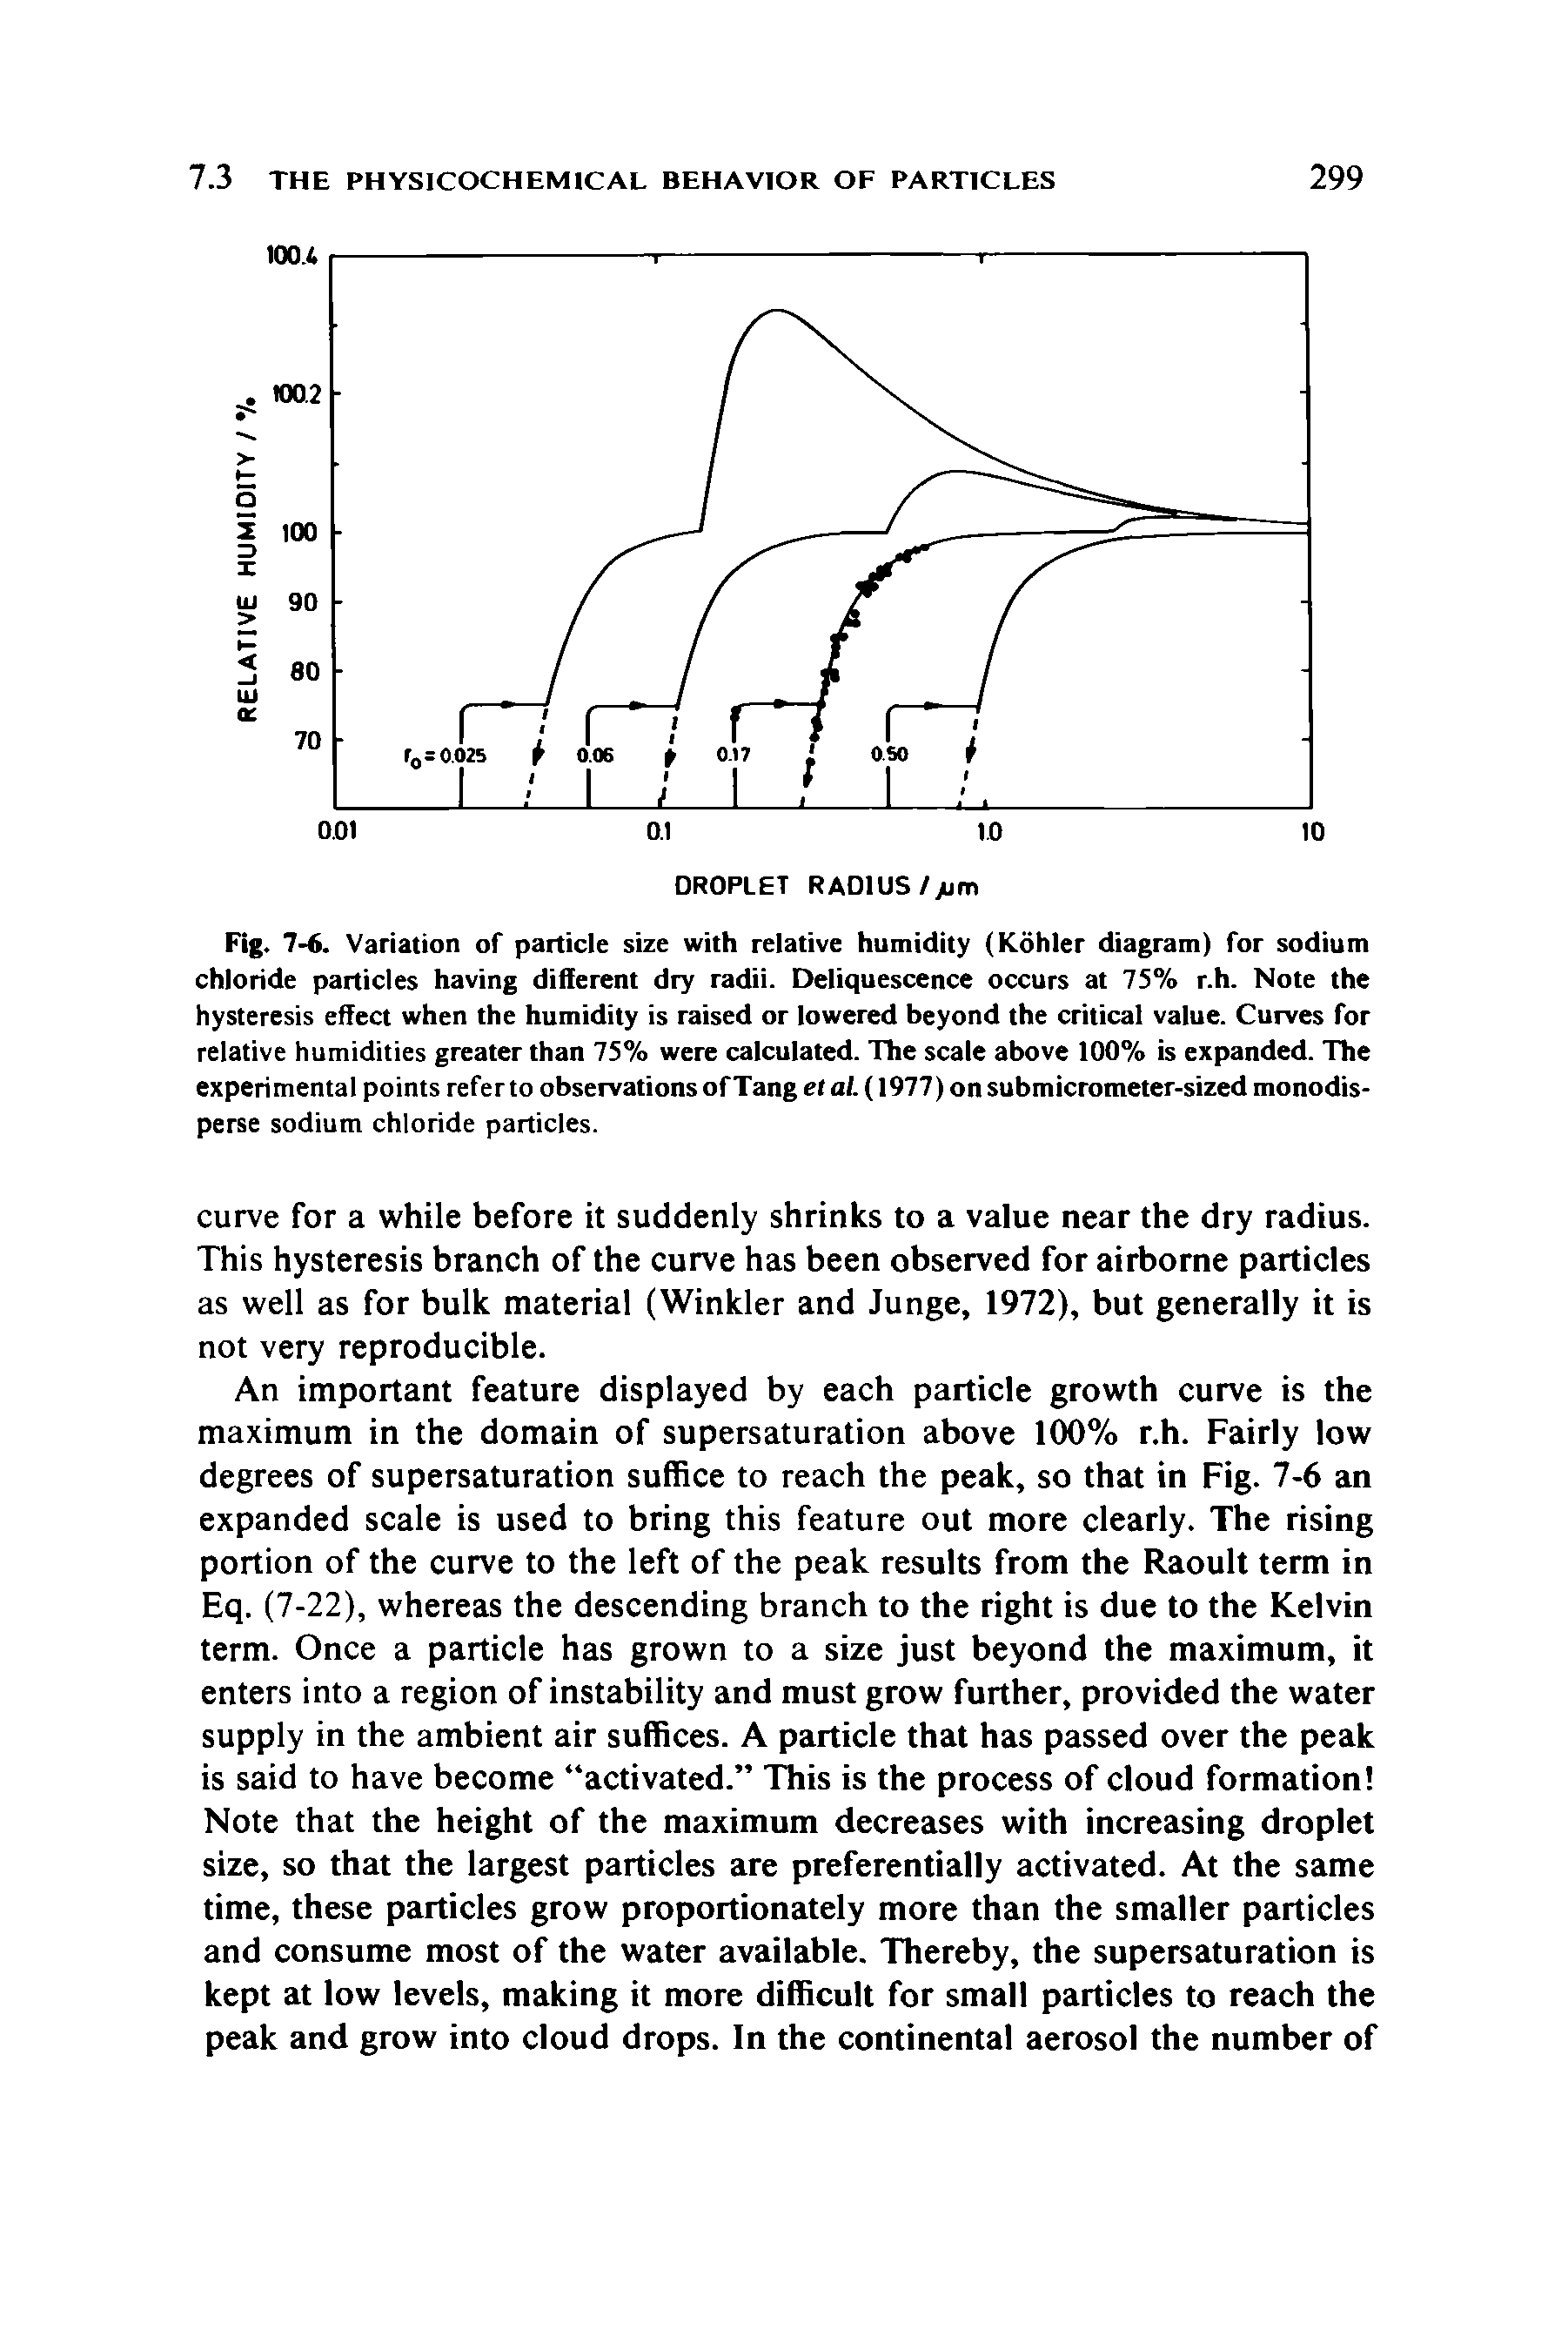 Fig. 7-6. Variation of particle size with relative humidity (Kohler diagram) for sodium chloride particles having different dry radii. Deliquescence occurs at 75% r.h. Note the hysteresis effect when the humidity is raised or lowered beyond the critical value. Curves for relative humidities greater than 75% were calculated. The scale above 100% is expanded. The experimental points refer to observations of Tang et al. (1977) on submicrometer-sized monodis-perse sodium chloride particles.